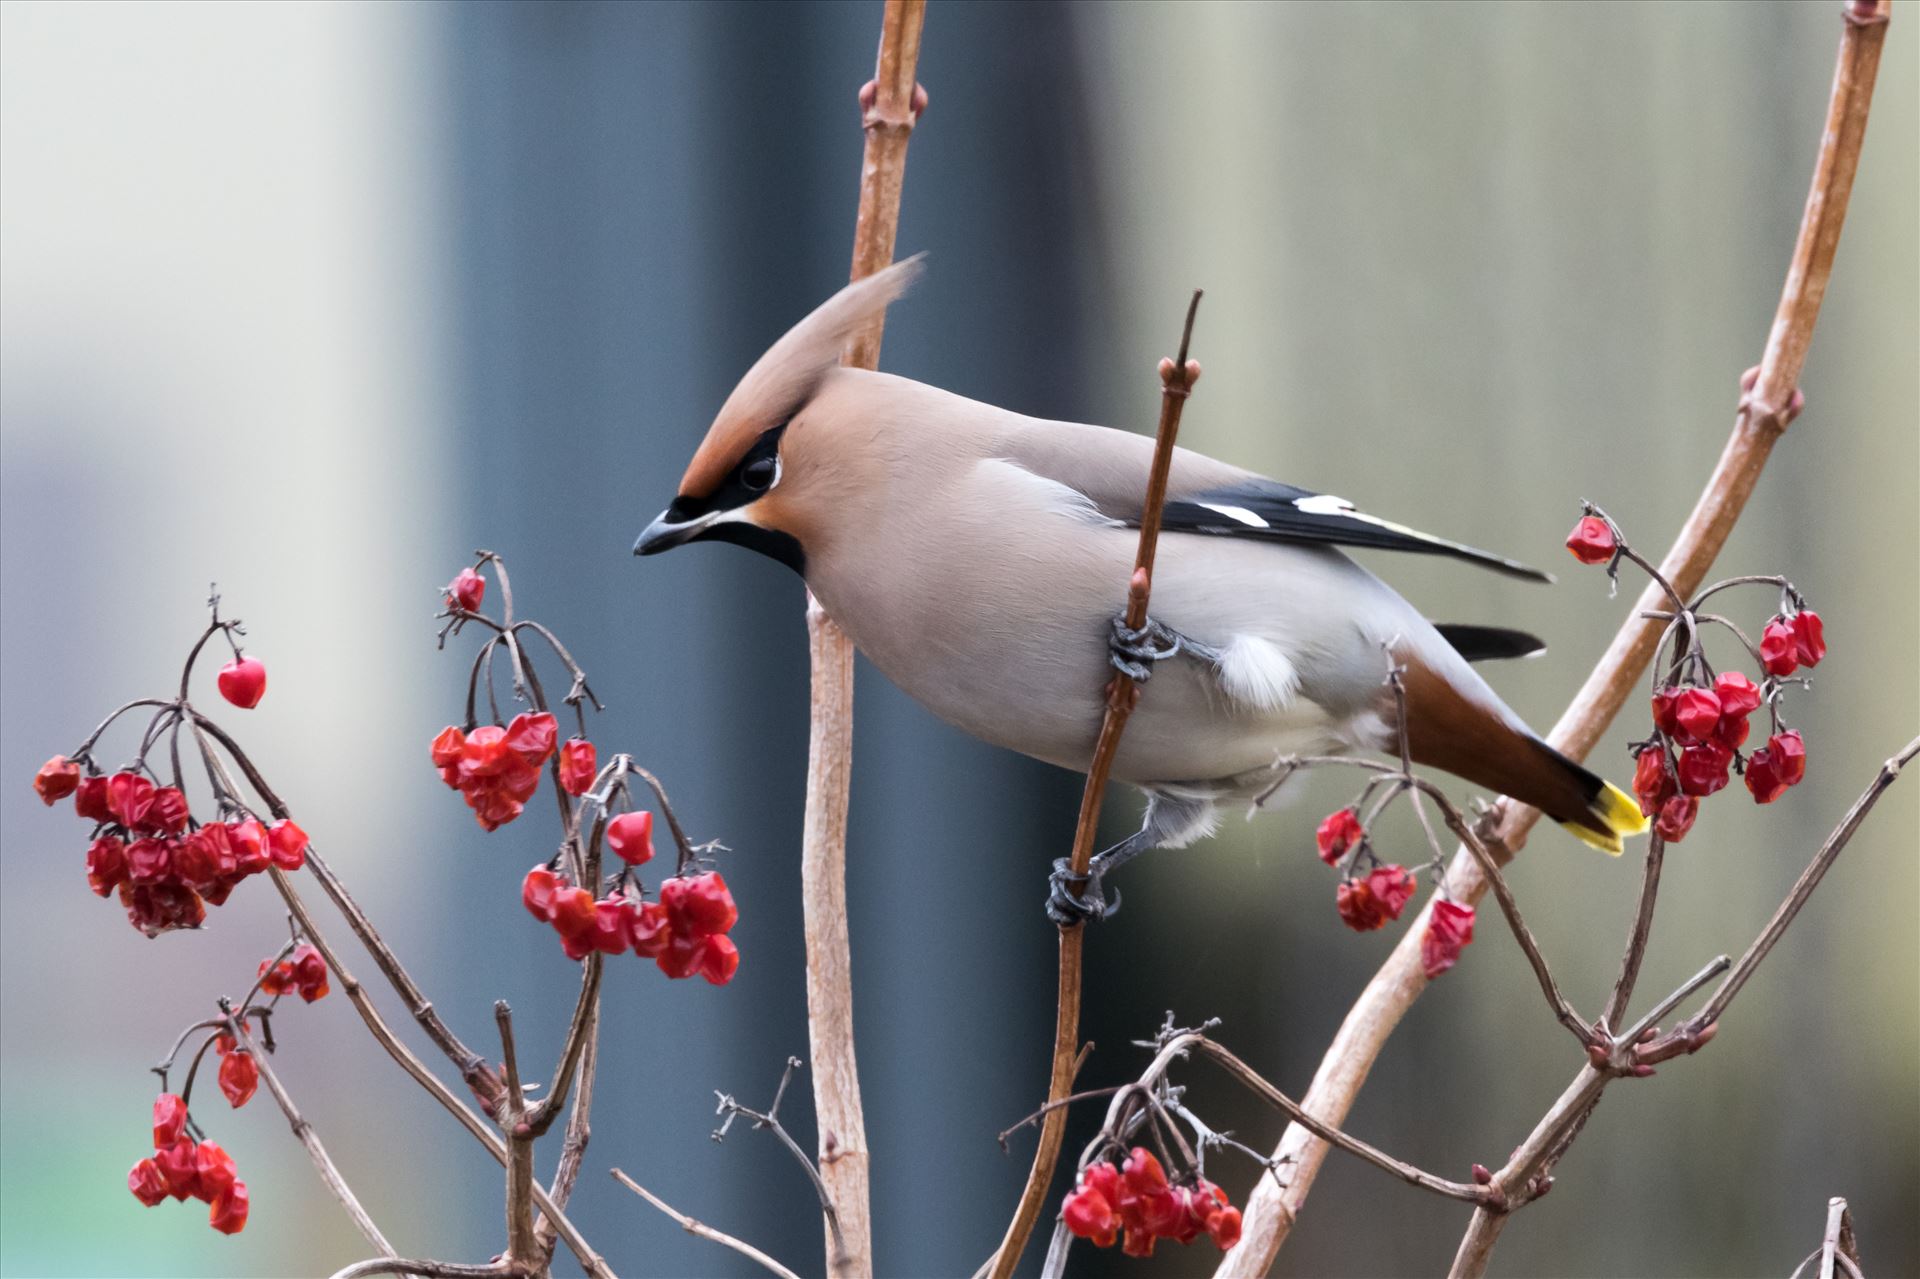 Waxwing RSPB Saltholme - A winter visiter, Waxwing, taken in January 2017 at RSPB Saltholme by AJ Stoves Photography